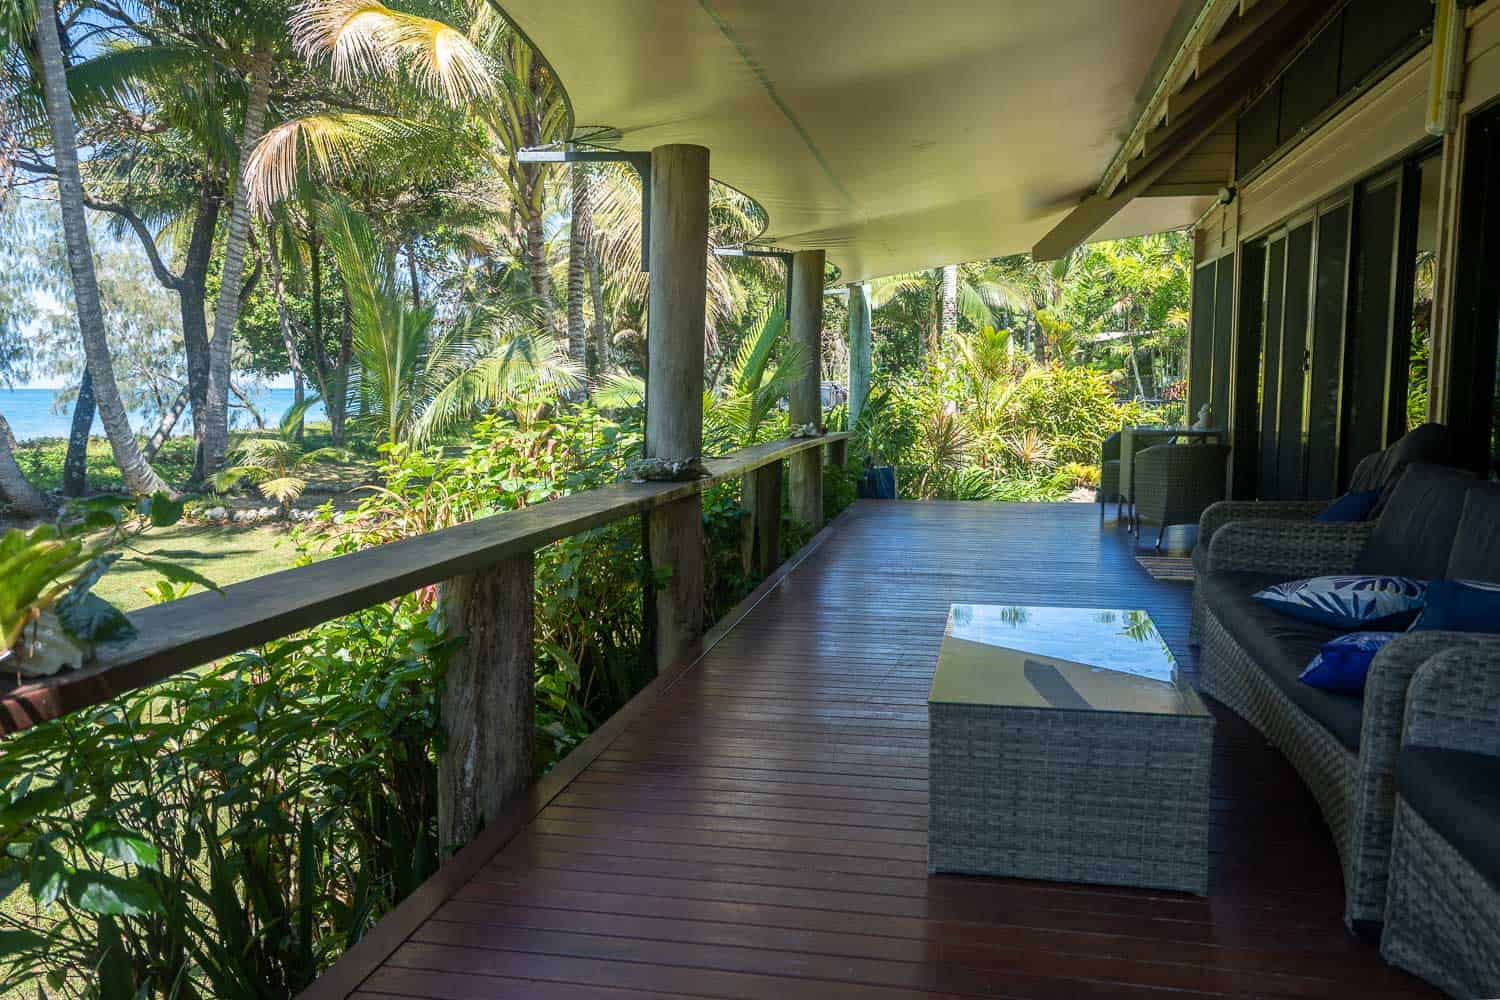 Porch of Airbnb beachfront house at Wongaling Beach, Mission Beach, North Queensland, Australia 